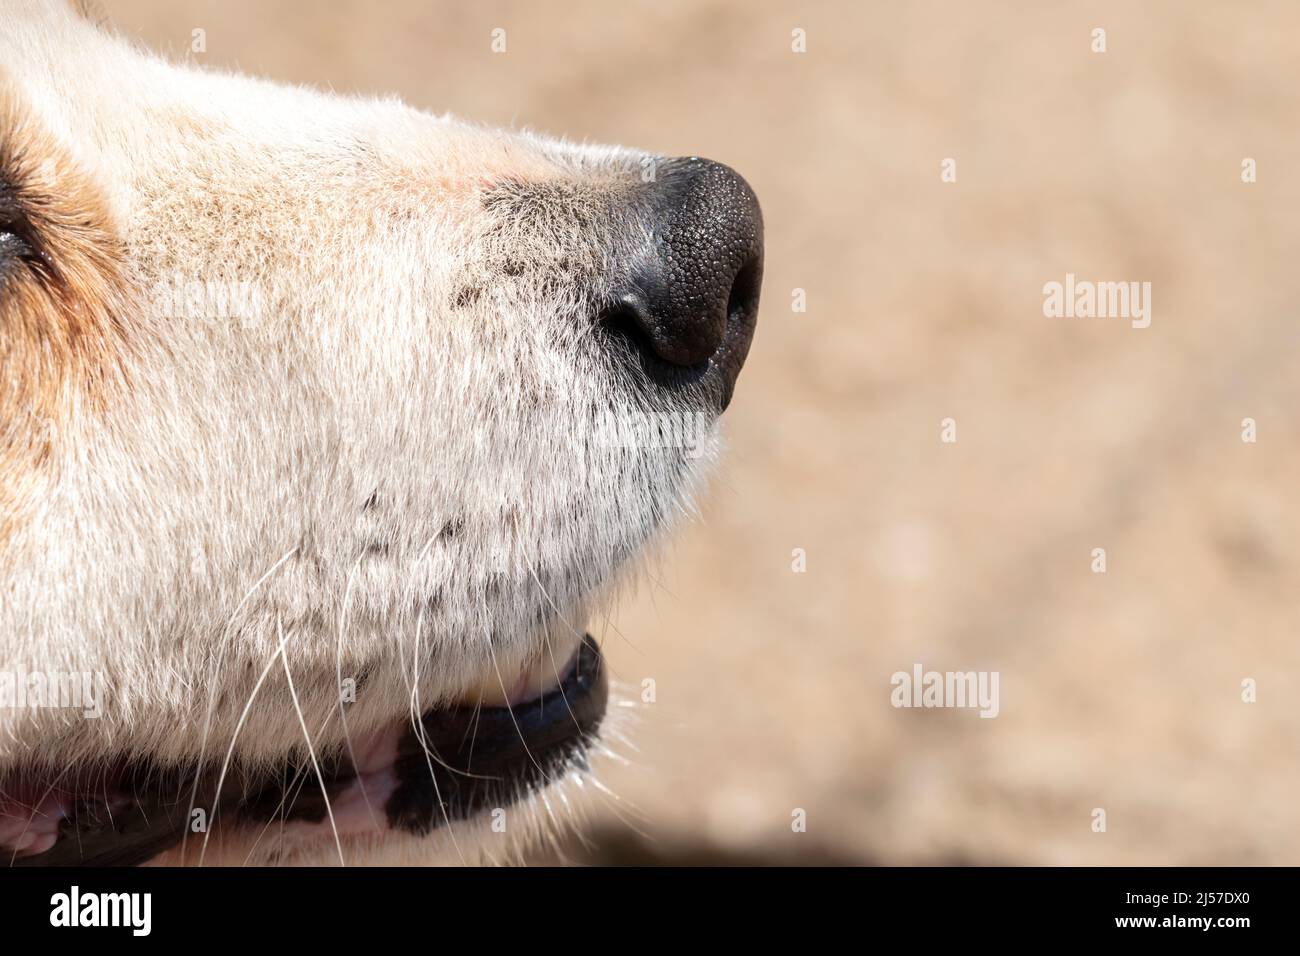 Close-up shot of a dog's snout showing plenty of details Stock Photo